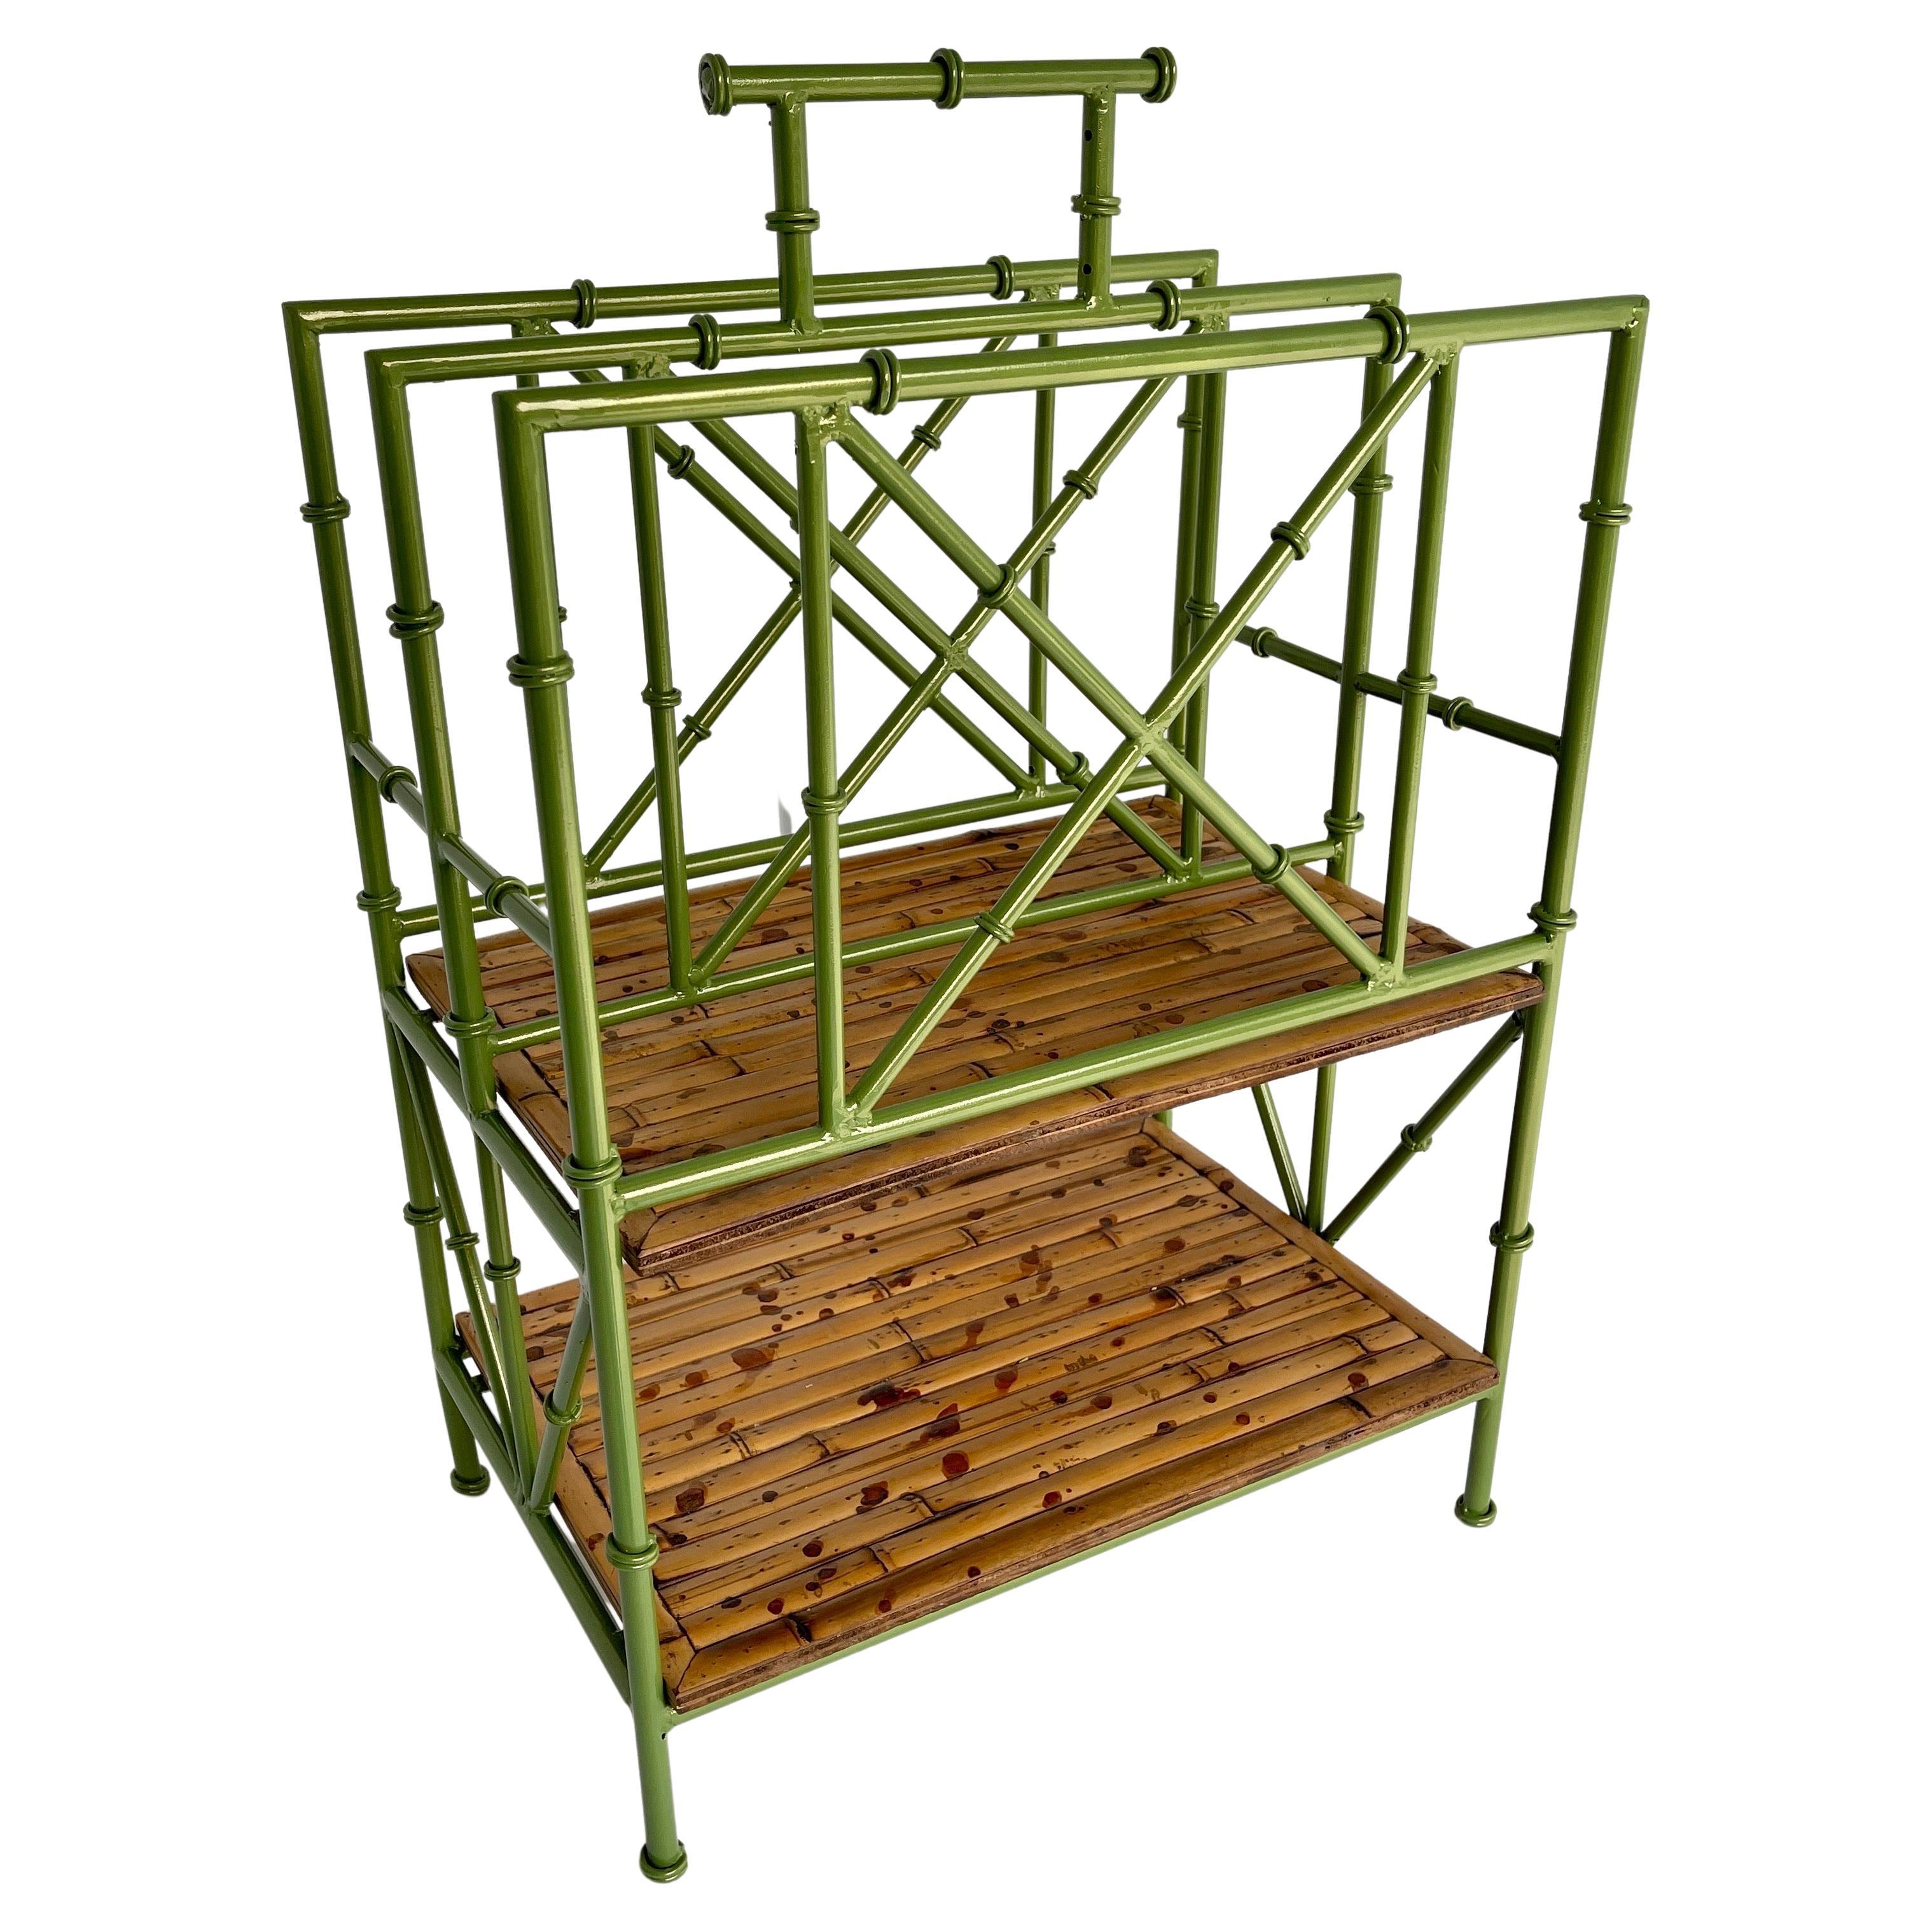 Leafy Green Faux Bamboo Powder-Coated Magazine Rack Holder

Elegant and versatile magazine holder with both form and function. This very sturdy and recently powder-coated two-tier leafy green piece looks wonderful standing alone or functional